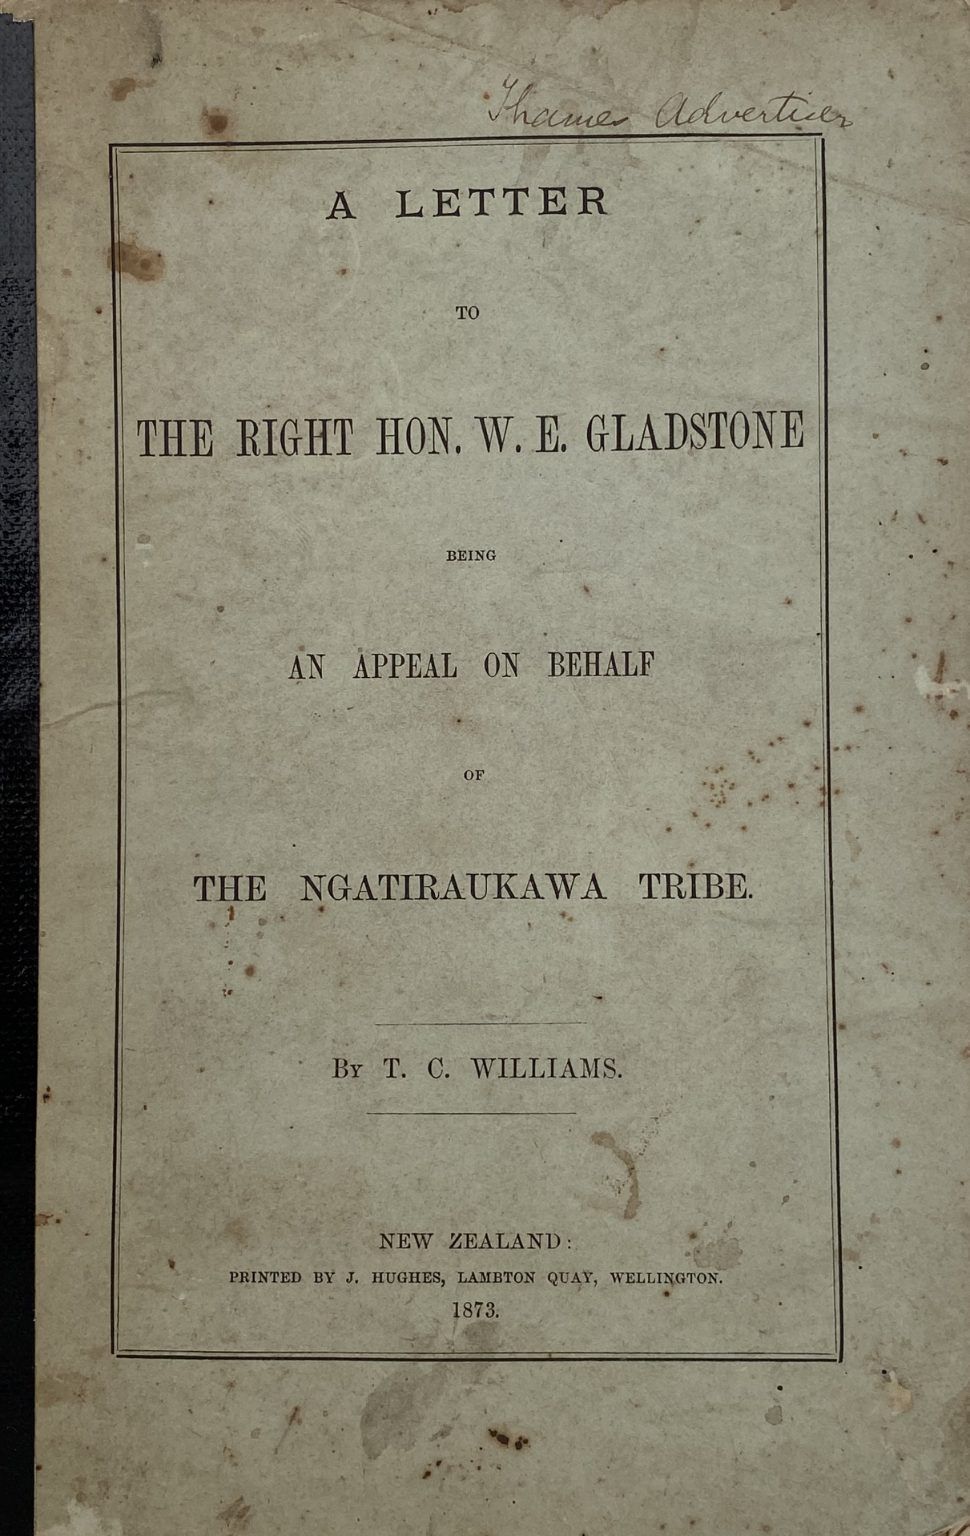 Letter To The Right Hon W. E. Gladstone On Behalf Of The Ngatiraukawa Tribe